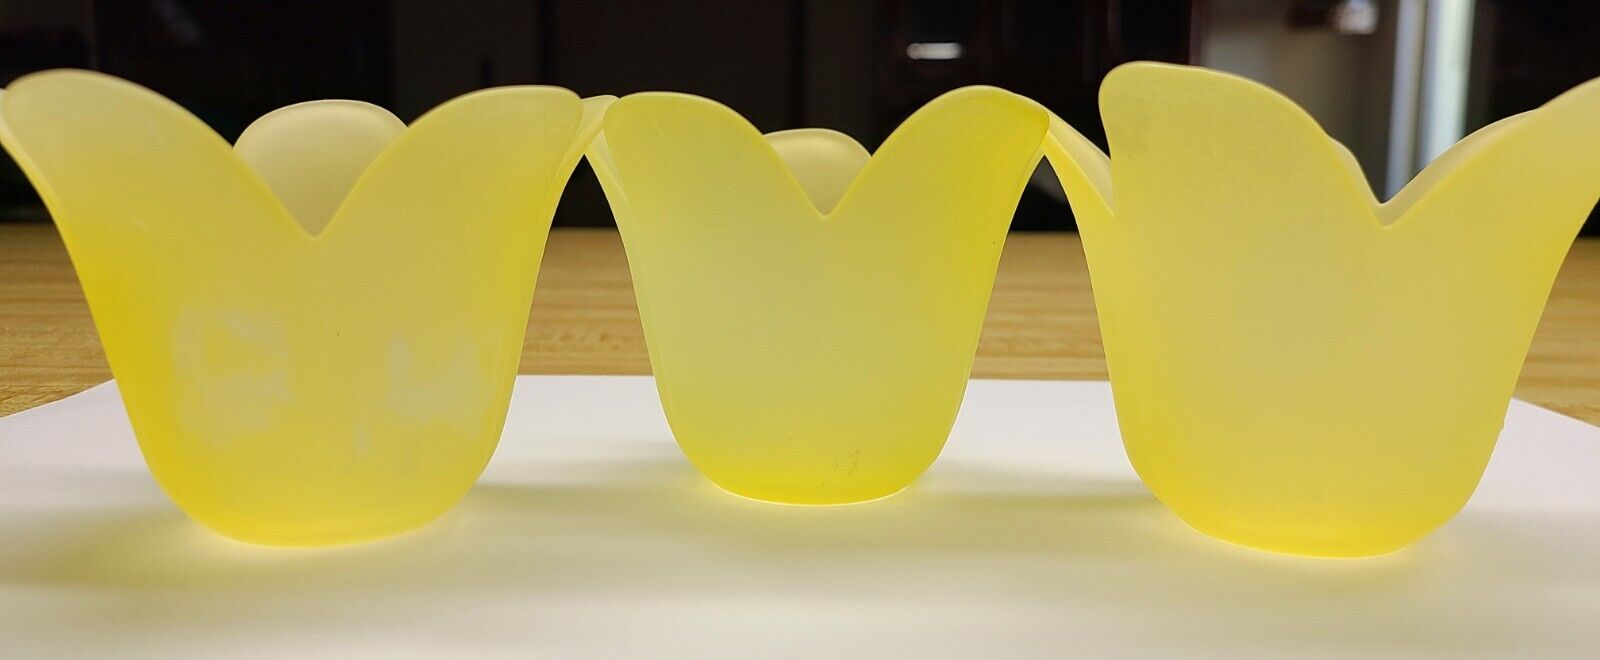 3 Vintage Yellow Glass Flower Candle Holders. Satin Frosted Glass. 